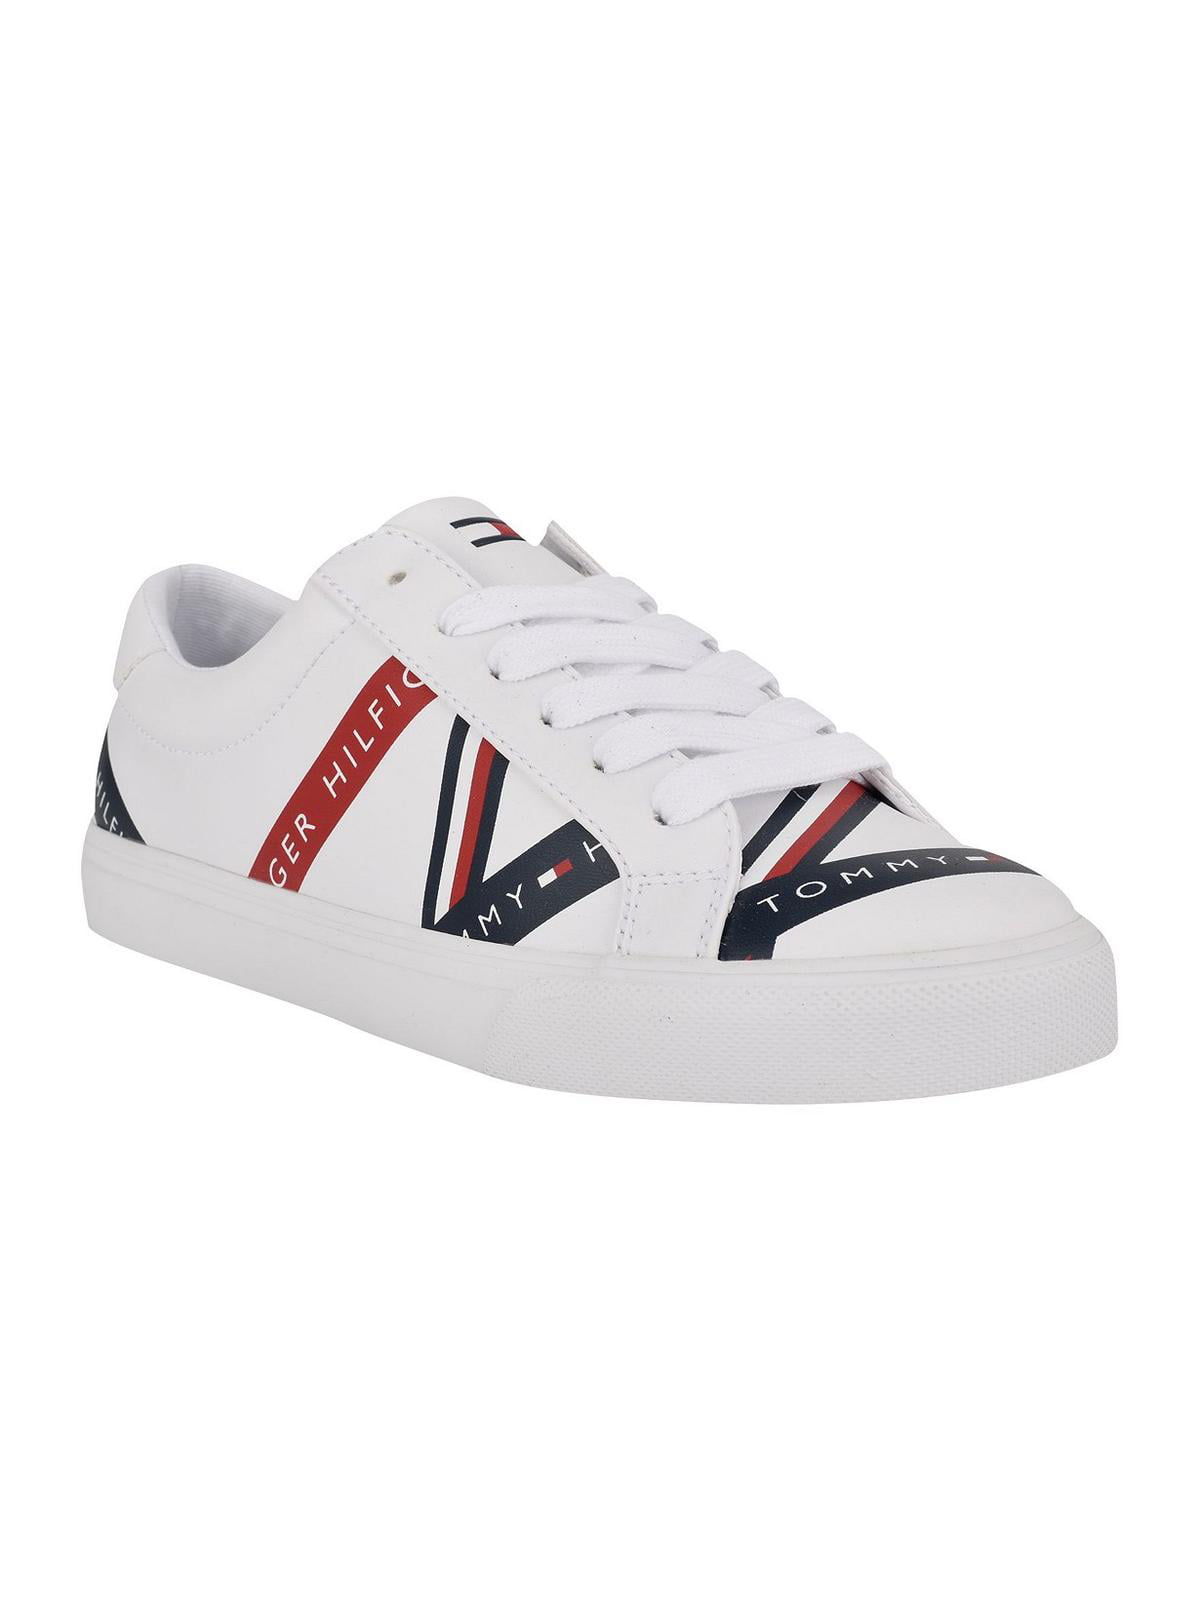 Tommy Hilfiger Womens Lacen Casual and Fashion Sneakers White 8 Medium - Walmart.com